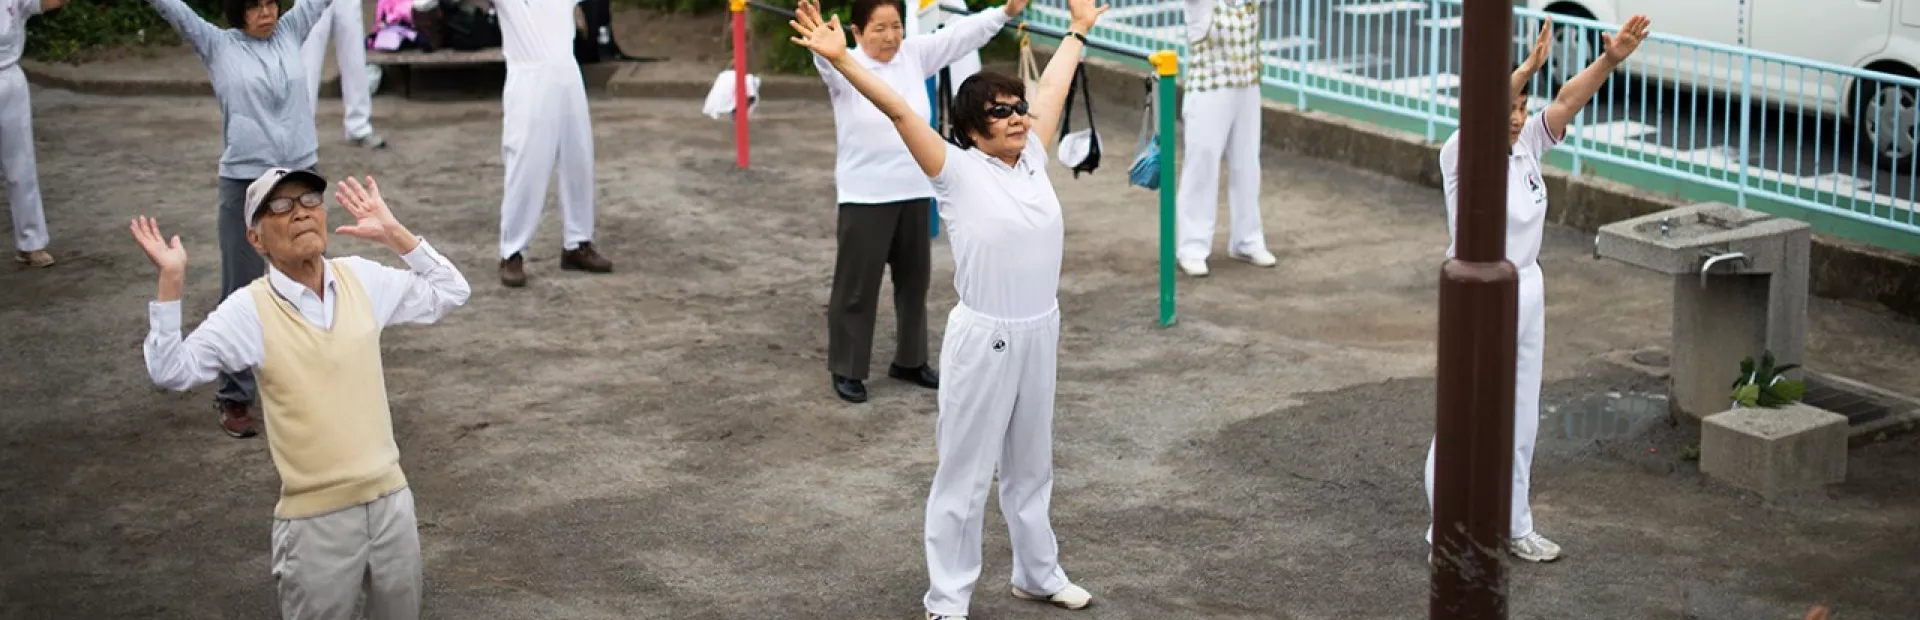 Yuko Yoshikawa and others partake in a communal fitness session outdoors in Tokyo.